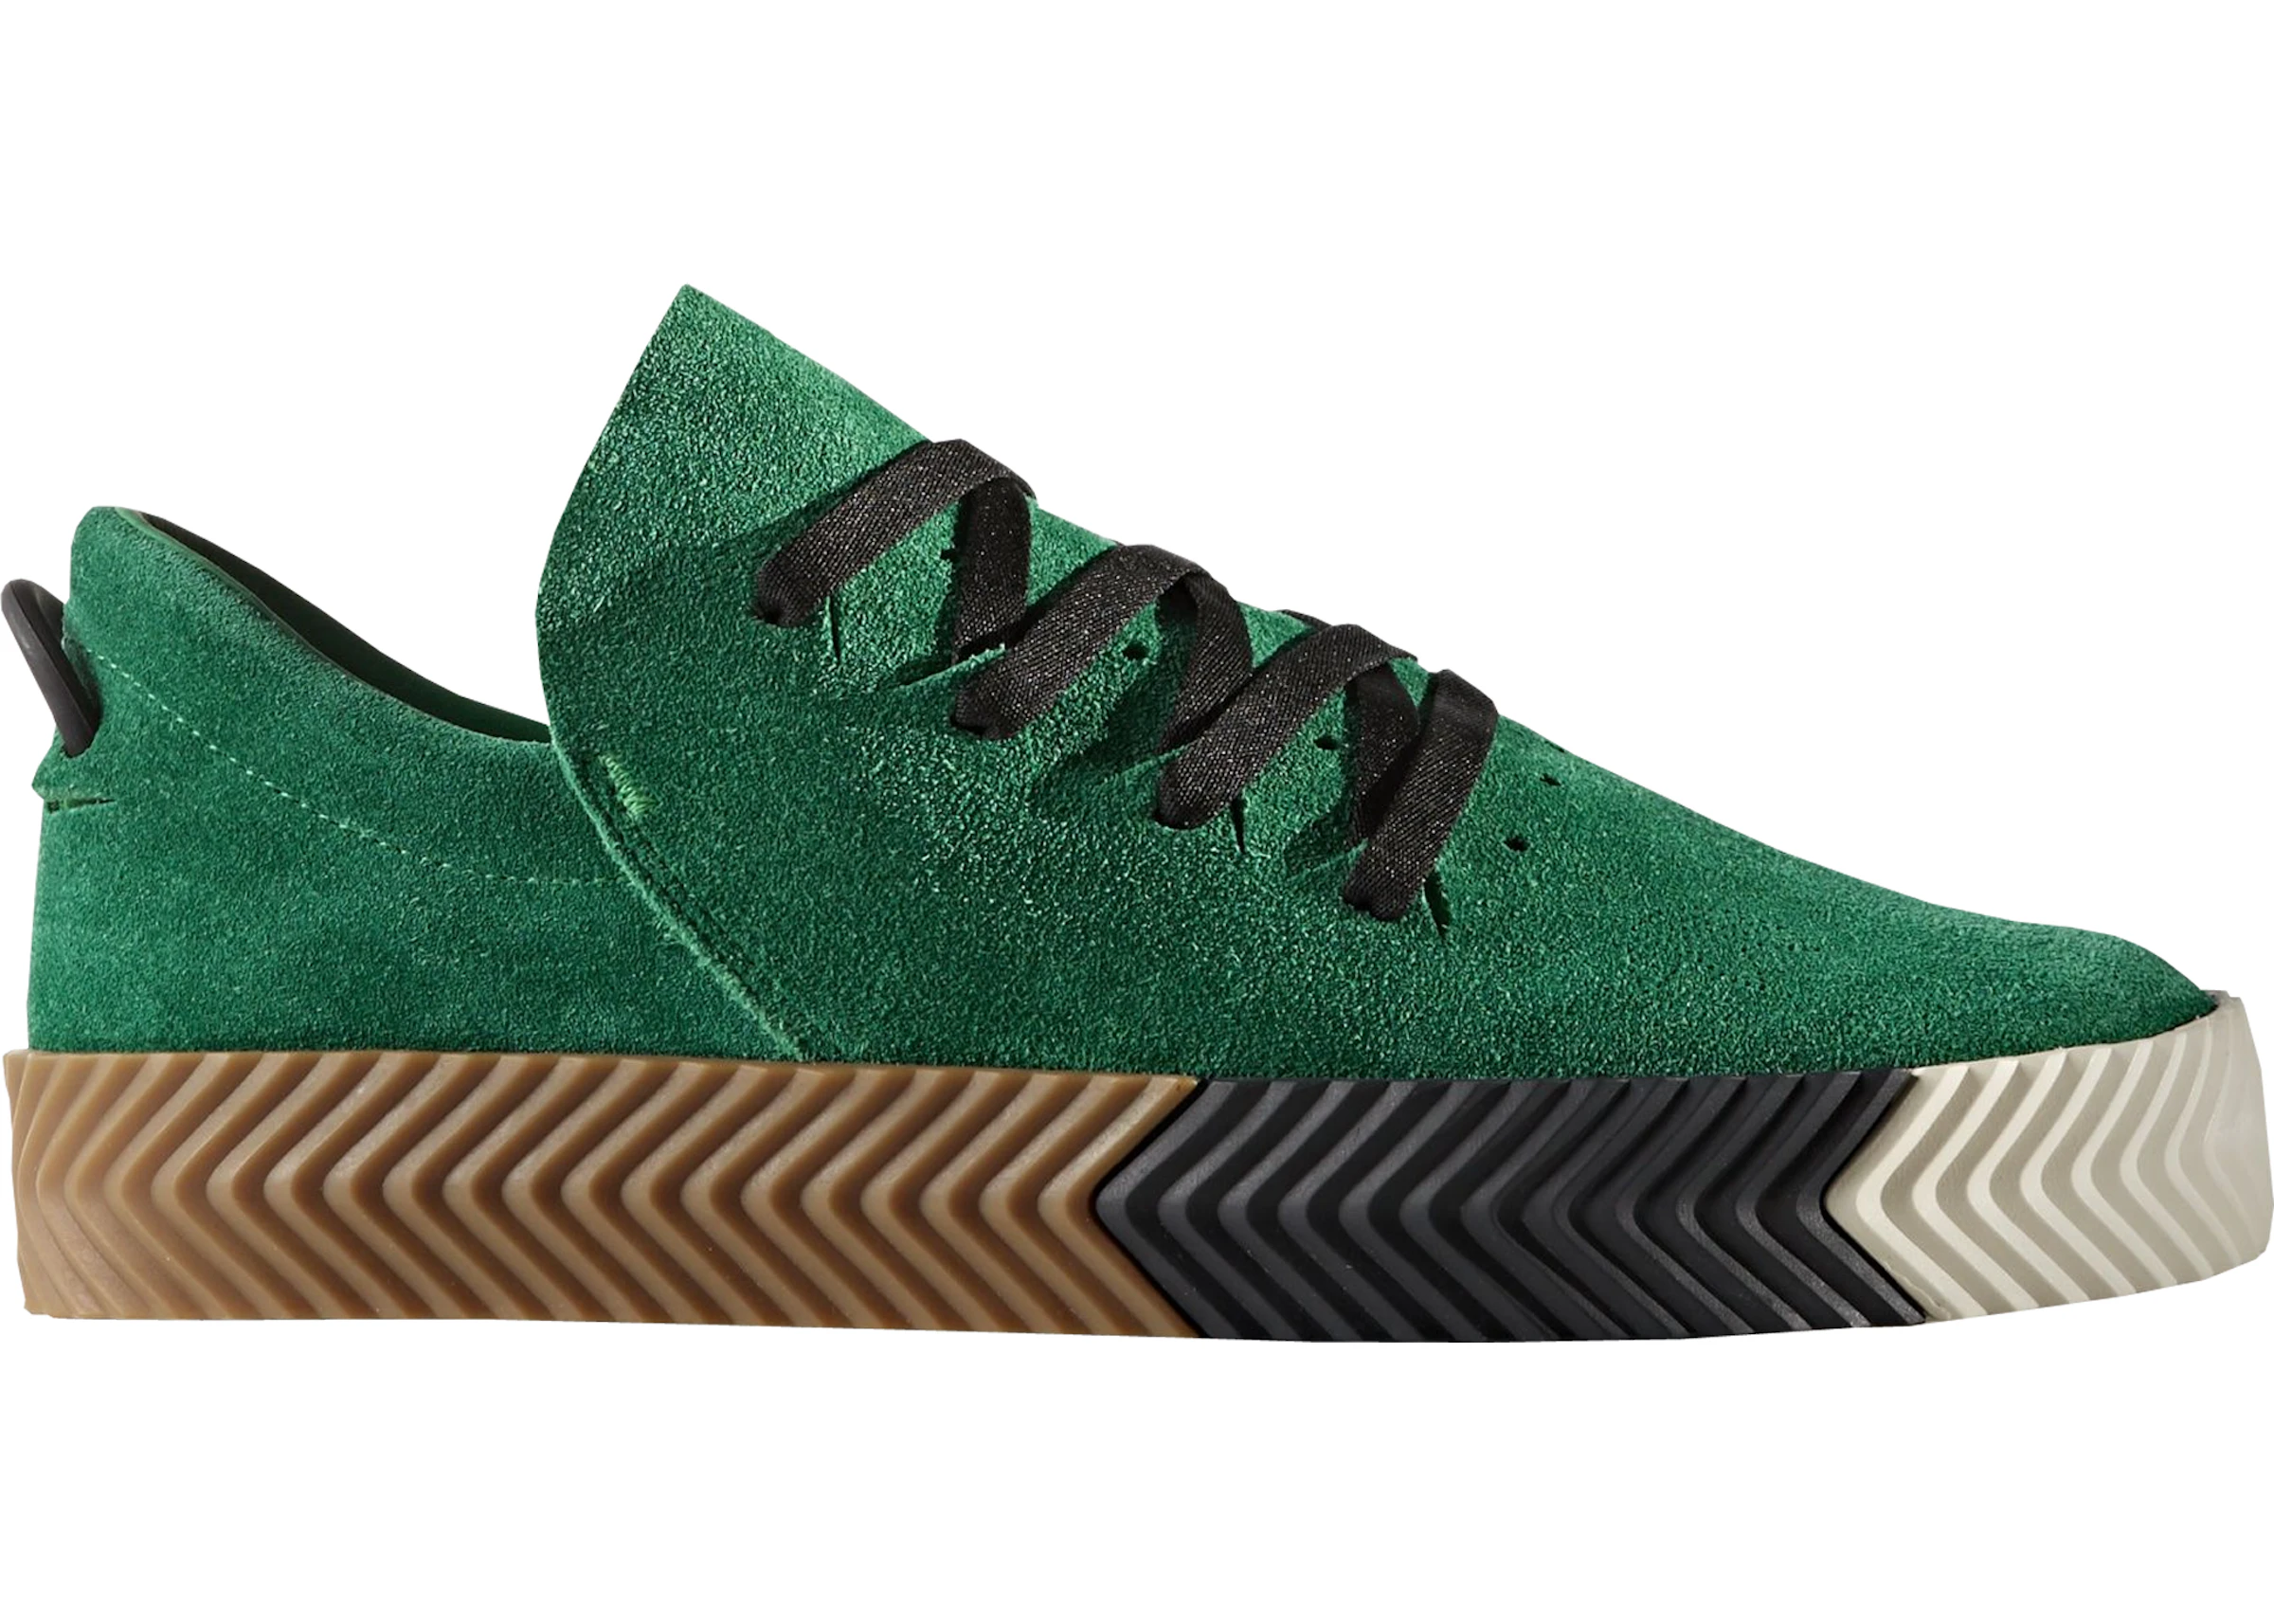 element Concealment Previous adidas AW Skate Alexander Wang Green - BY8907 - US